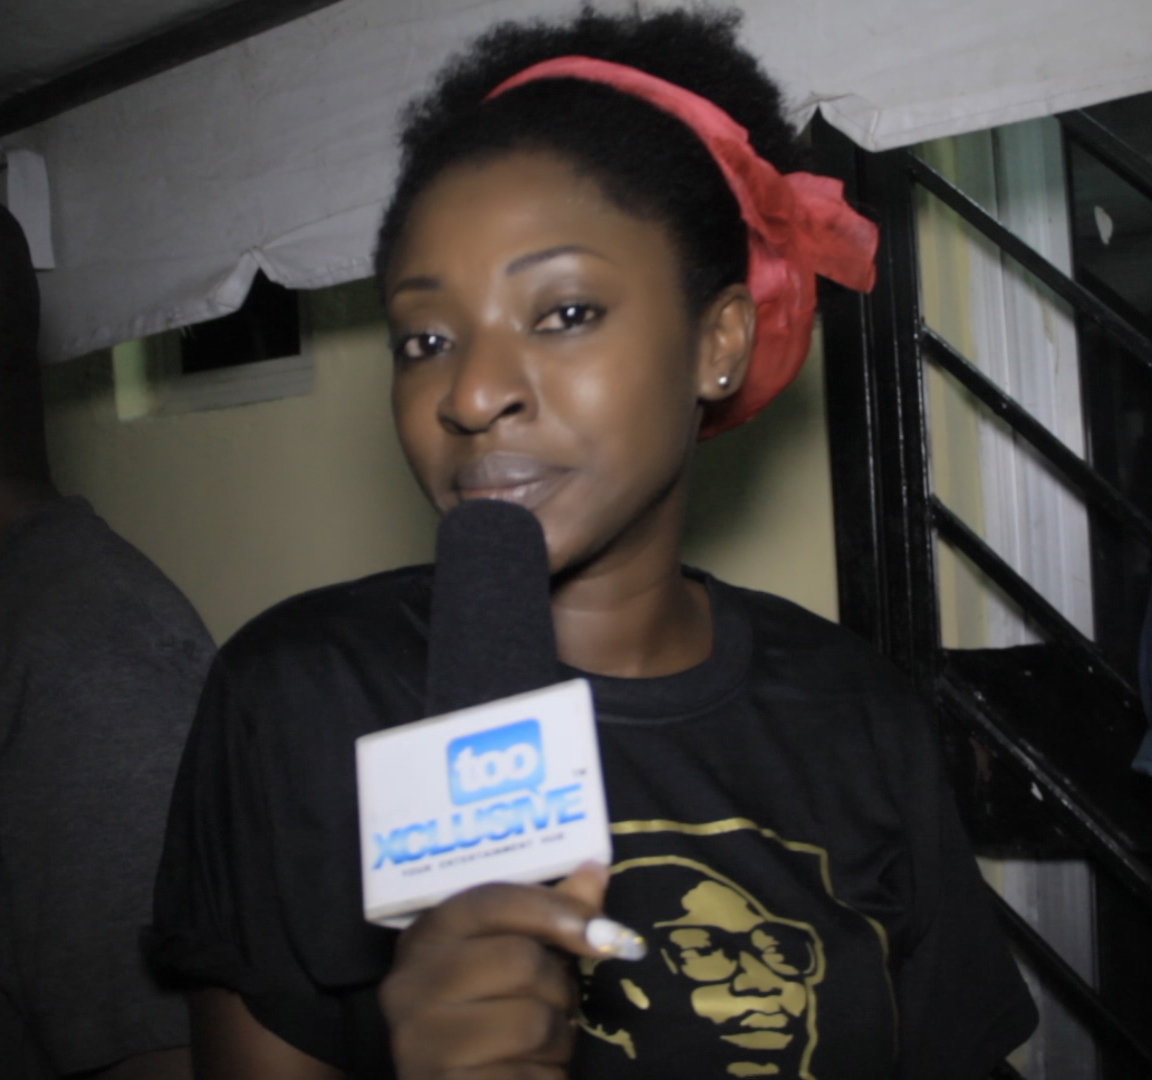 See More Photos From OJB Jezereel's Candle Light Procession